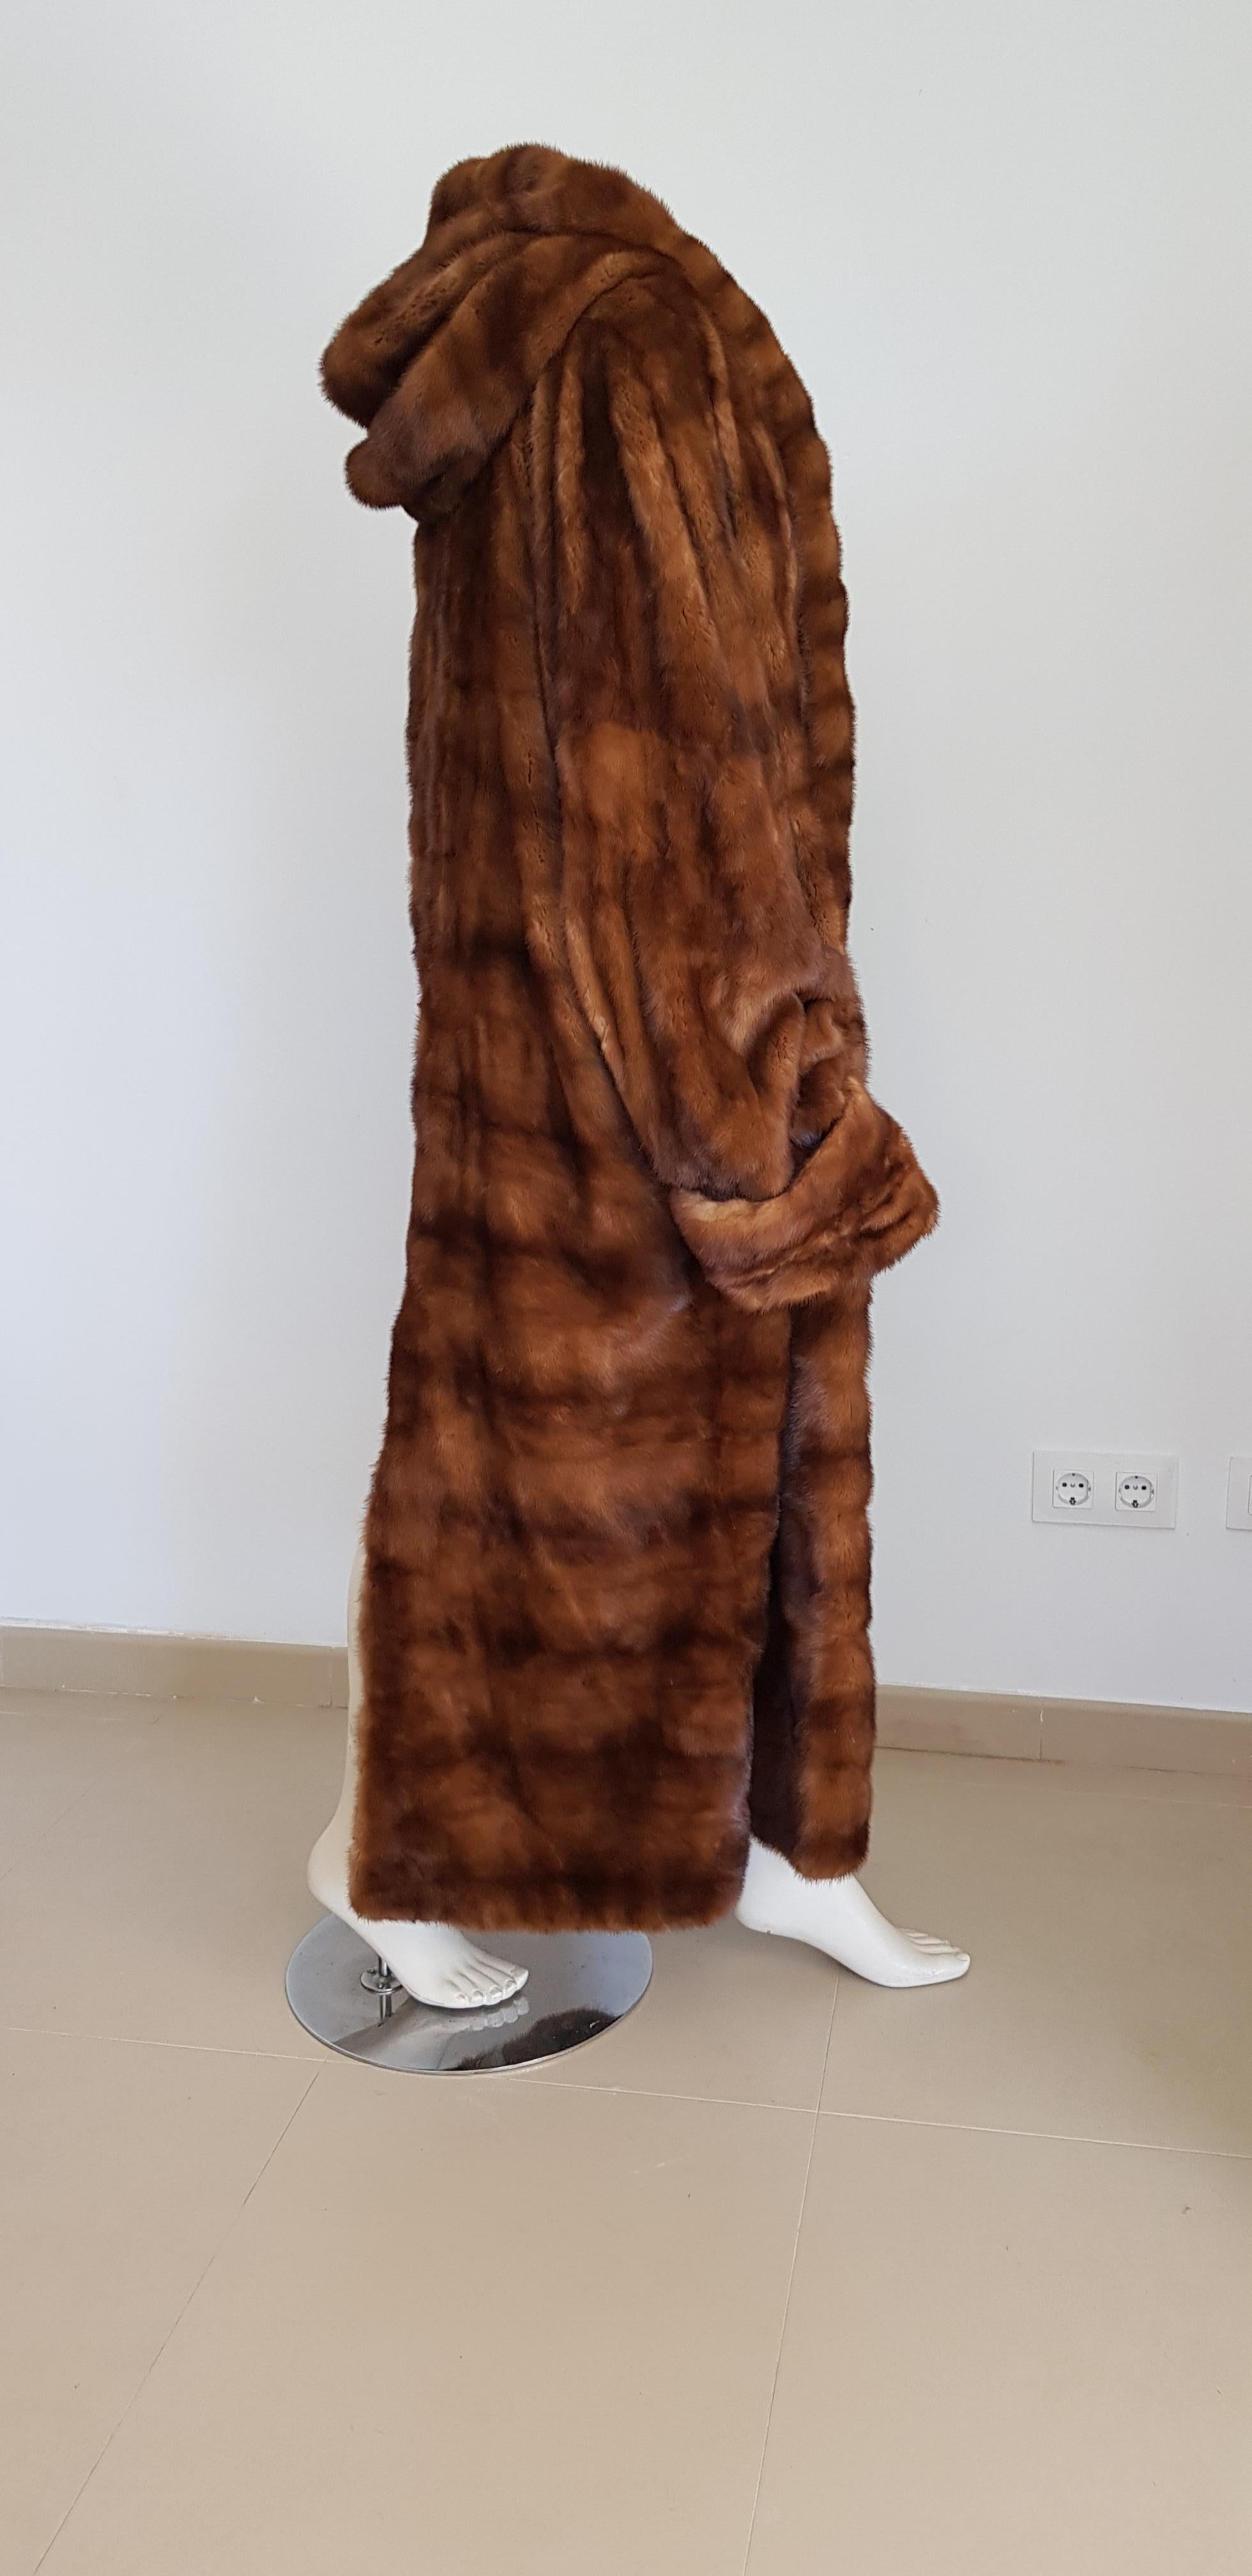 Gianfranco FERRE Haute Couture Brown Wild Russian Mink Made of whole skins Cashmere Lined Long Fur Coat. 
Excellent condition. Kept in a cold room. 
SIZE: equivalent to about Small / Medium / Large / XL / XXL, please review approx measurements as